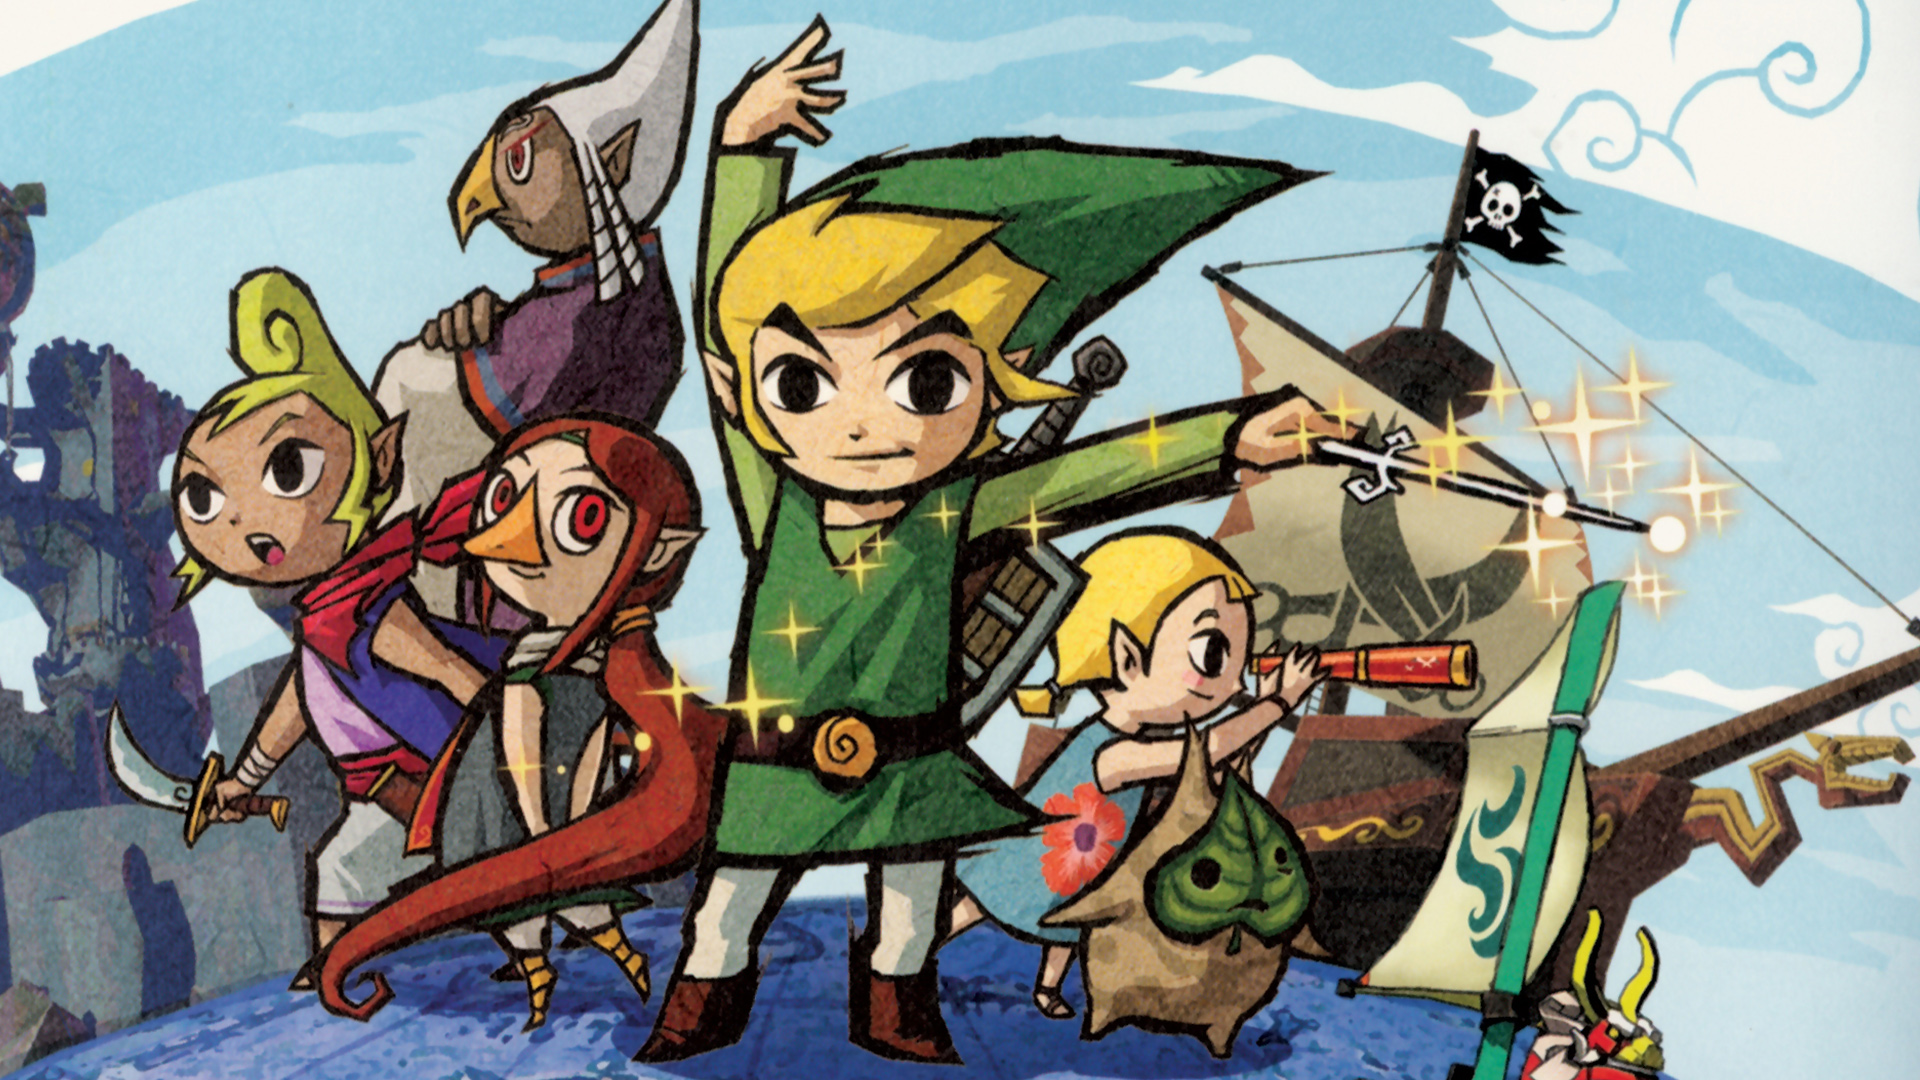 The Wind Waker HD Needs to Come to Nintendo Switch - VGCultureHQ